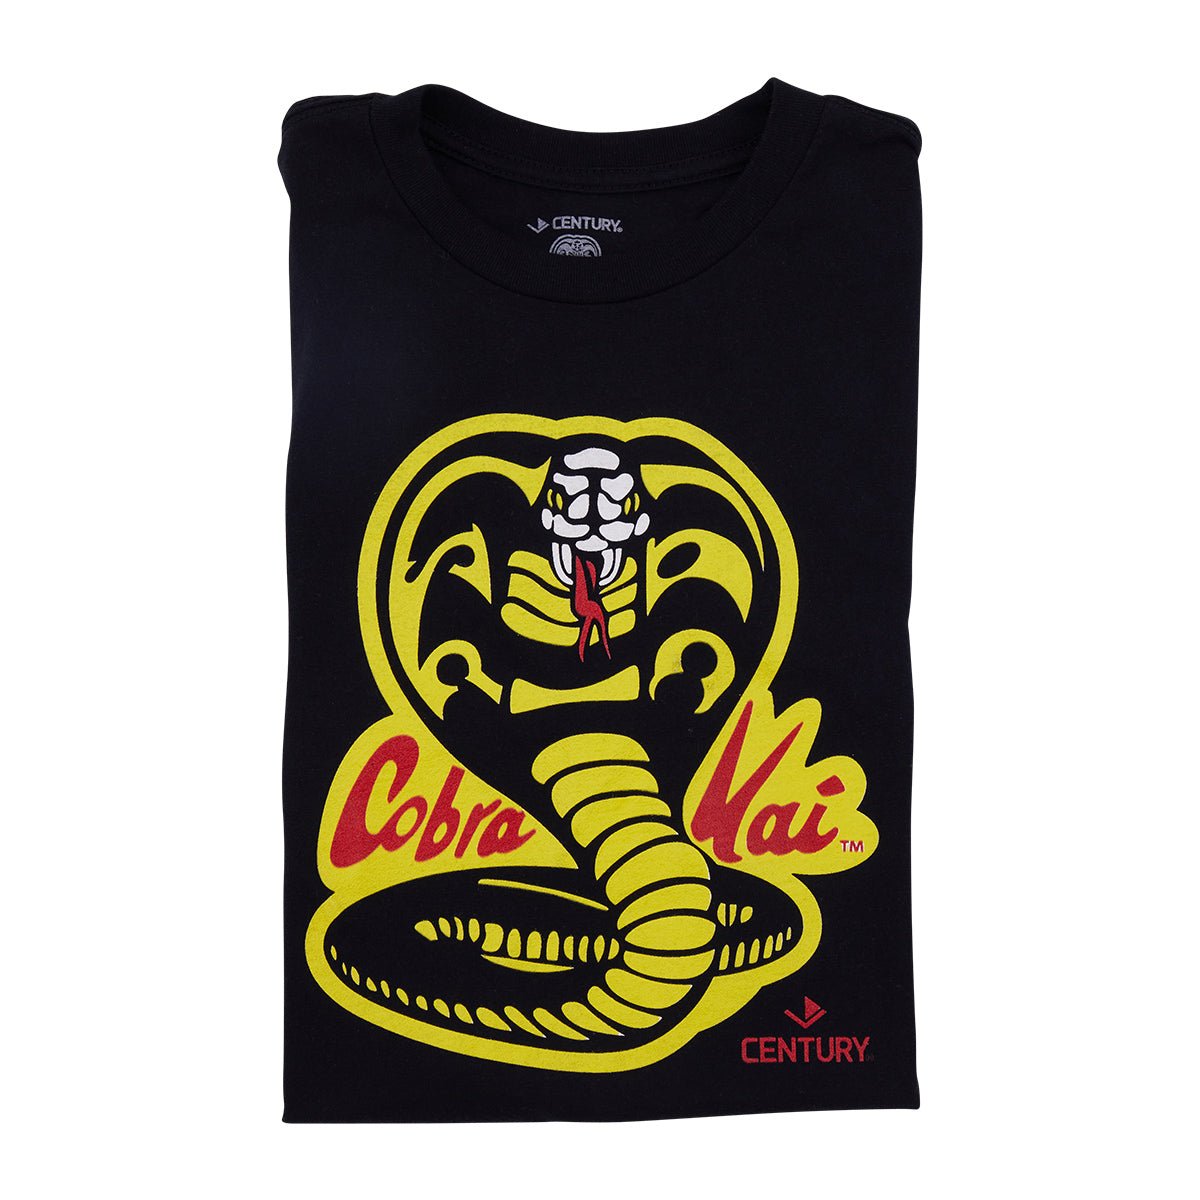  Karate Kid Officially Licensed Cobra Kai No Mercy Baseball 3/4  Sleeve T-Shirt (Black-White), Small : Clothing, Shoes & Jewelry